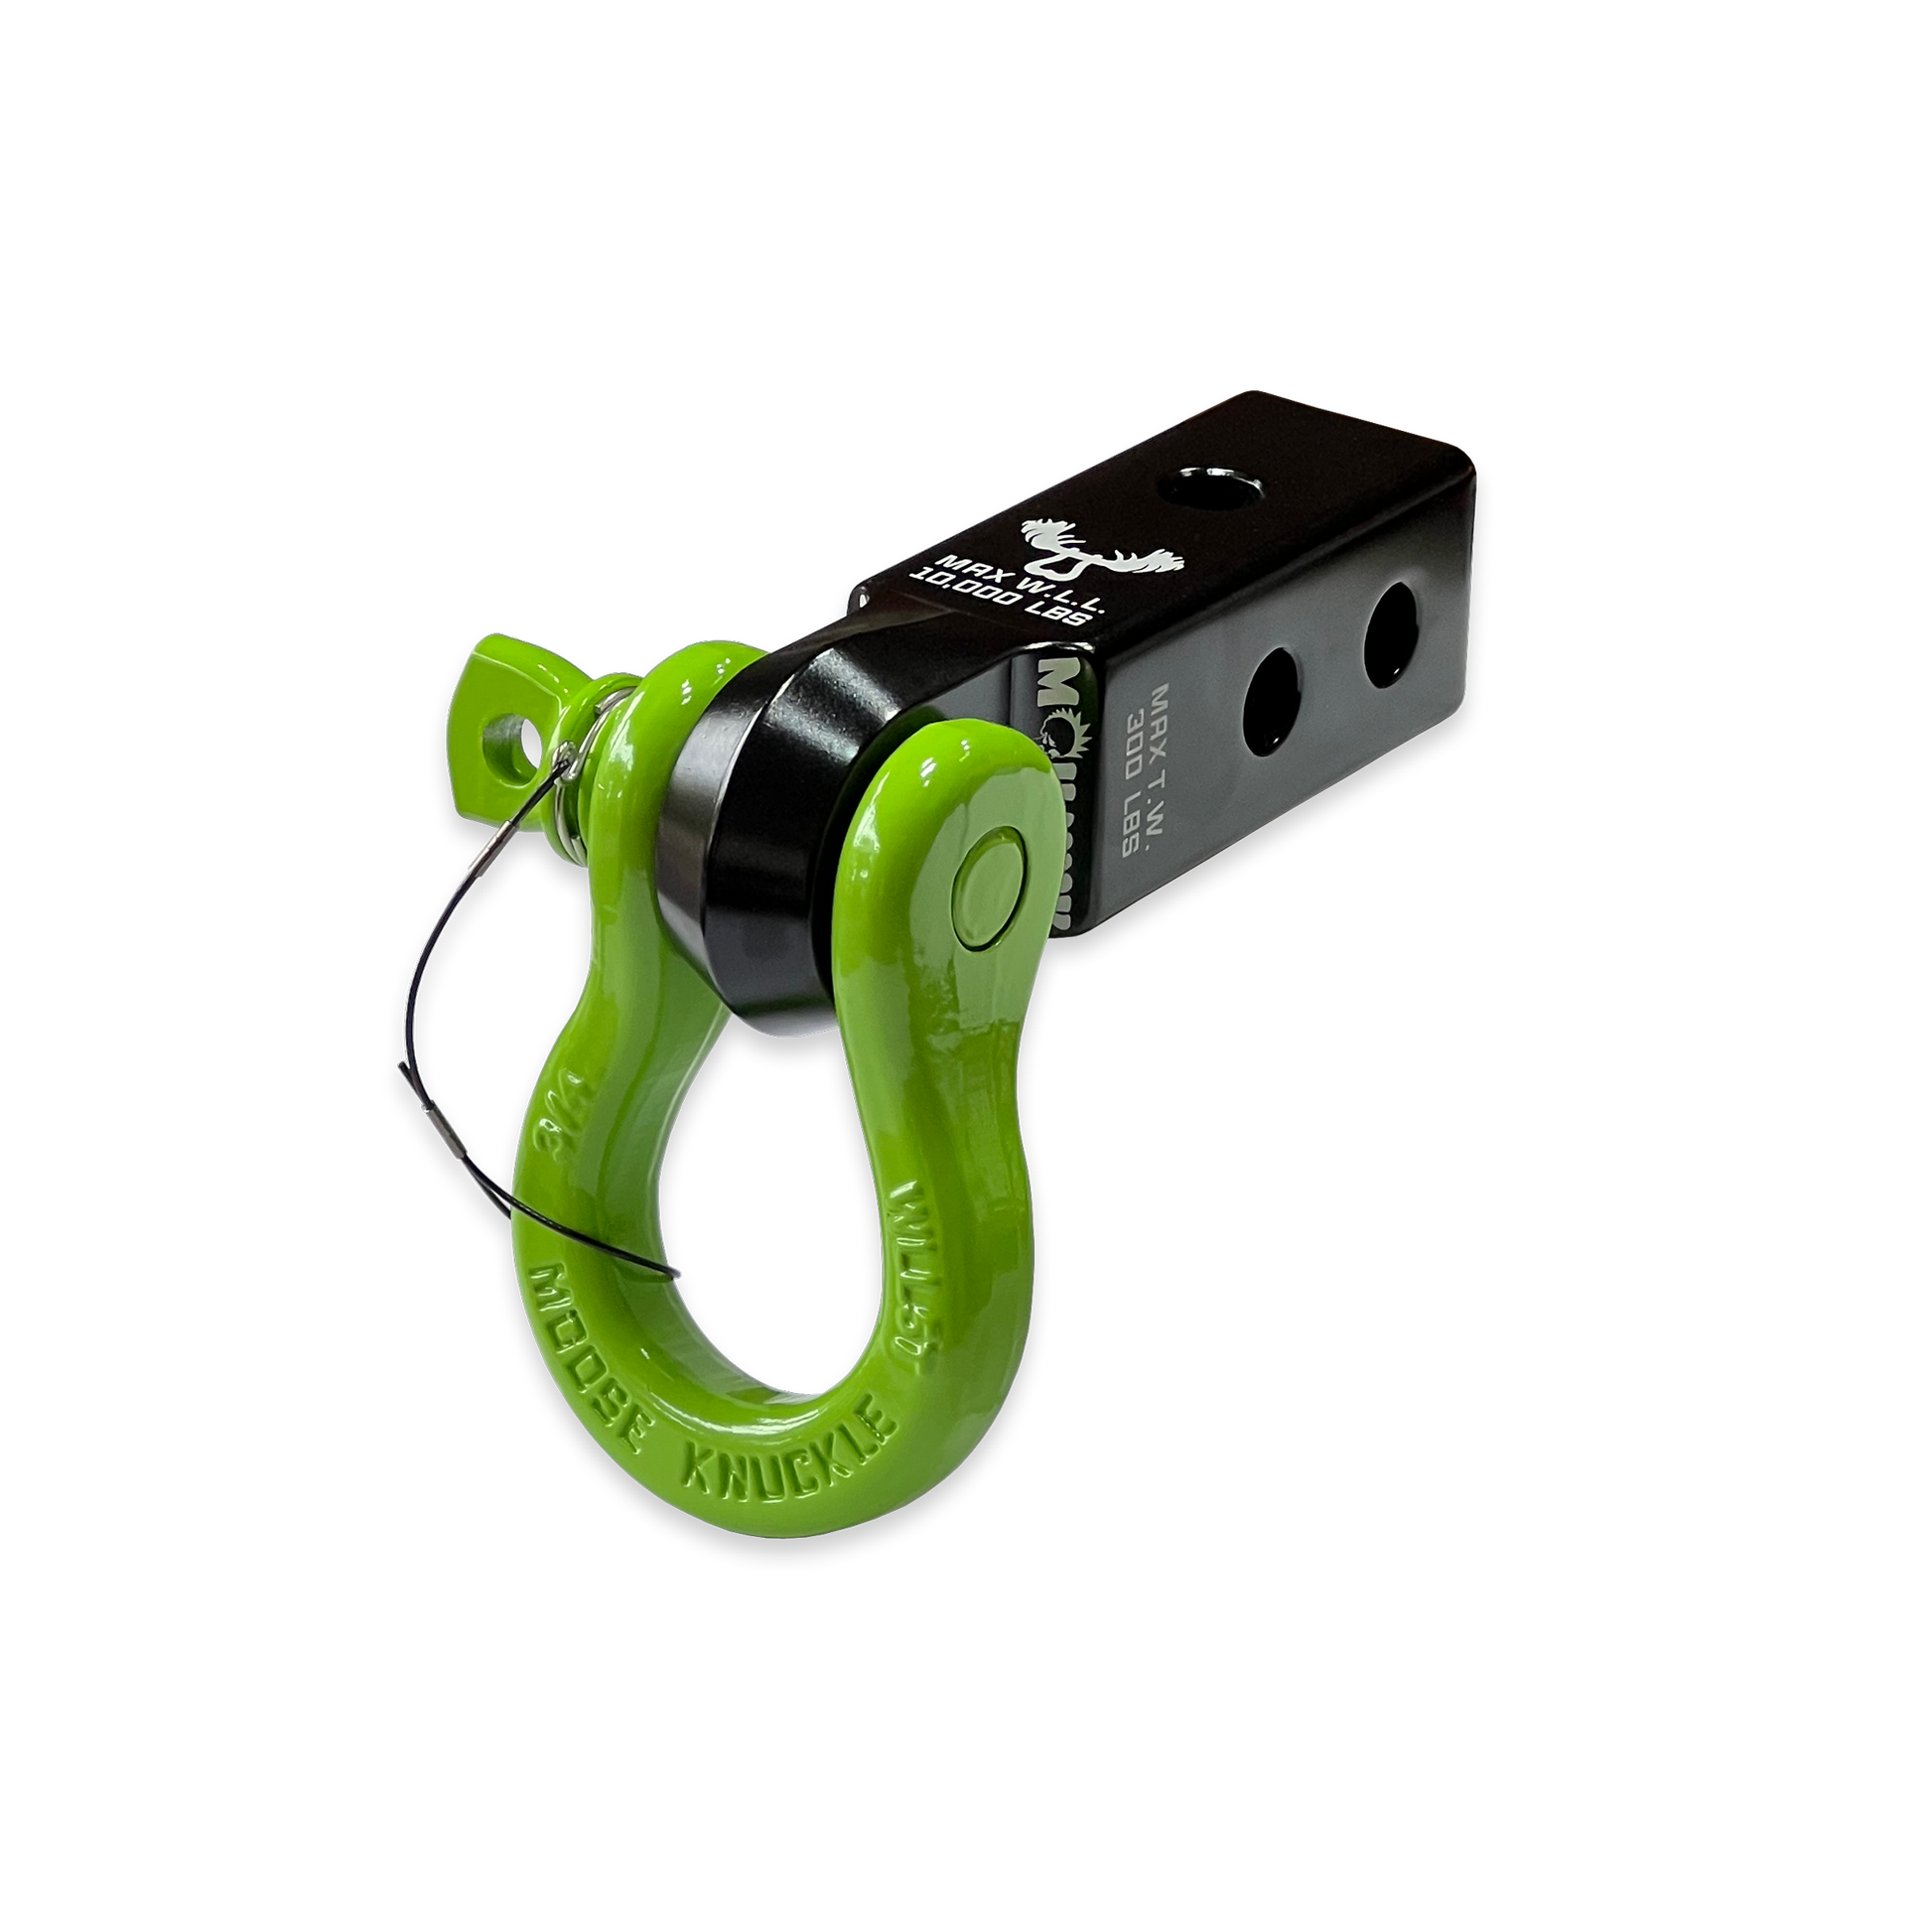 B'oh 3/4 Pin Shackle & 2.0 Receiver (Black and Green Combo)